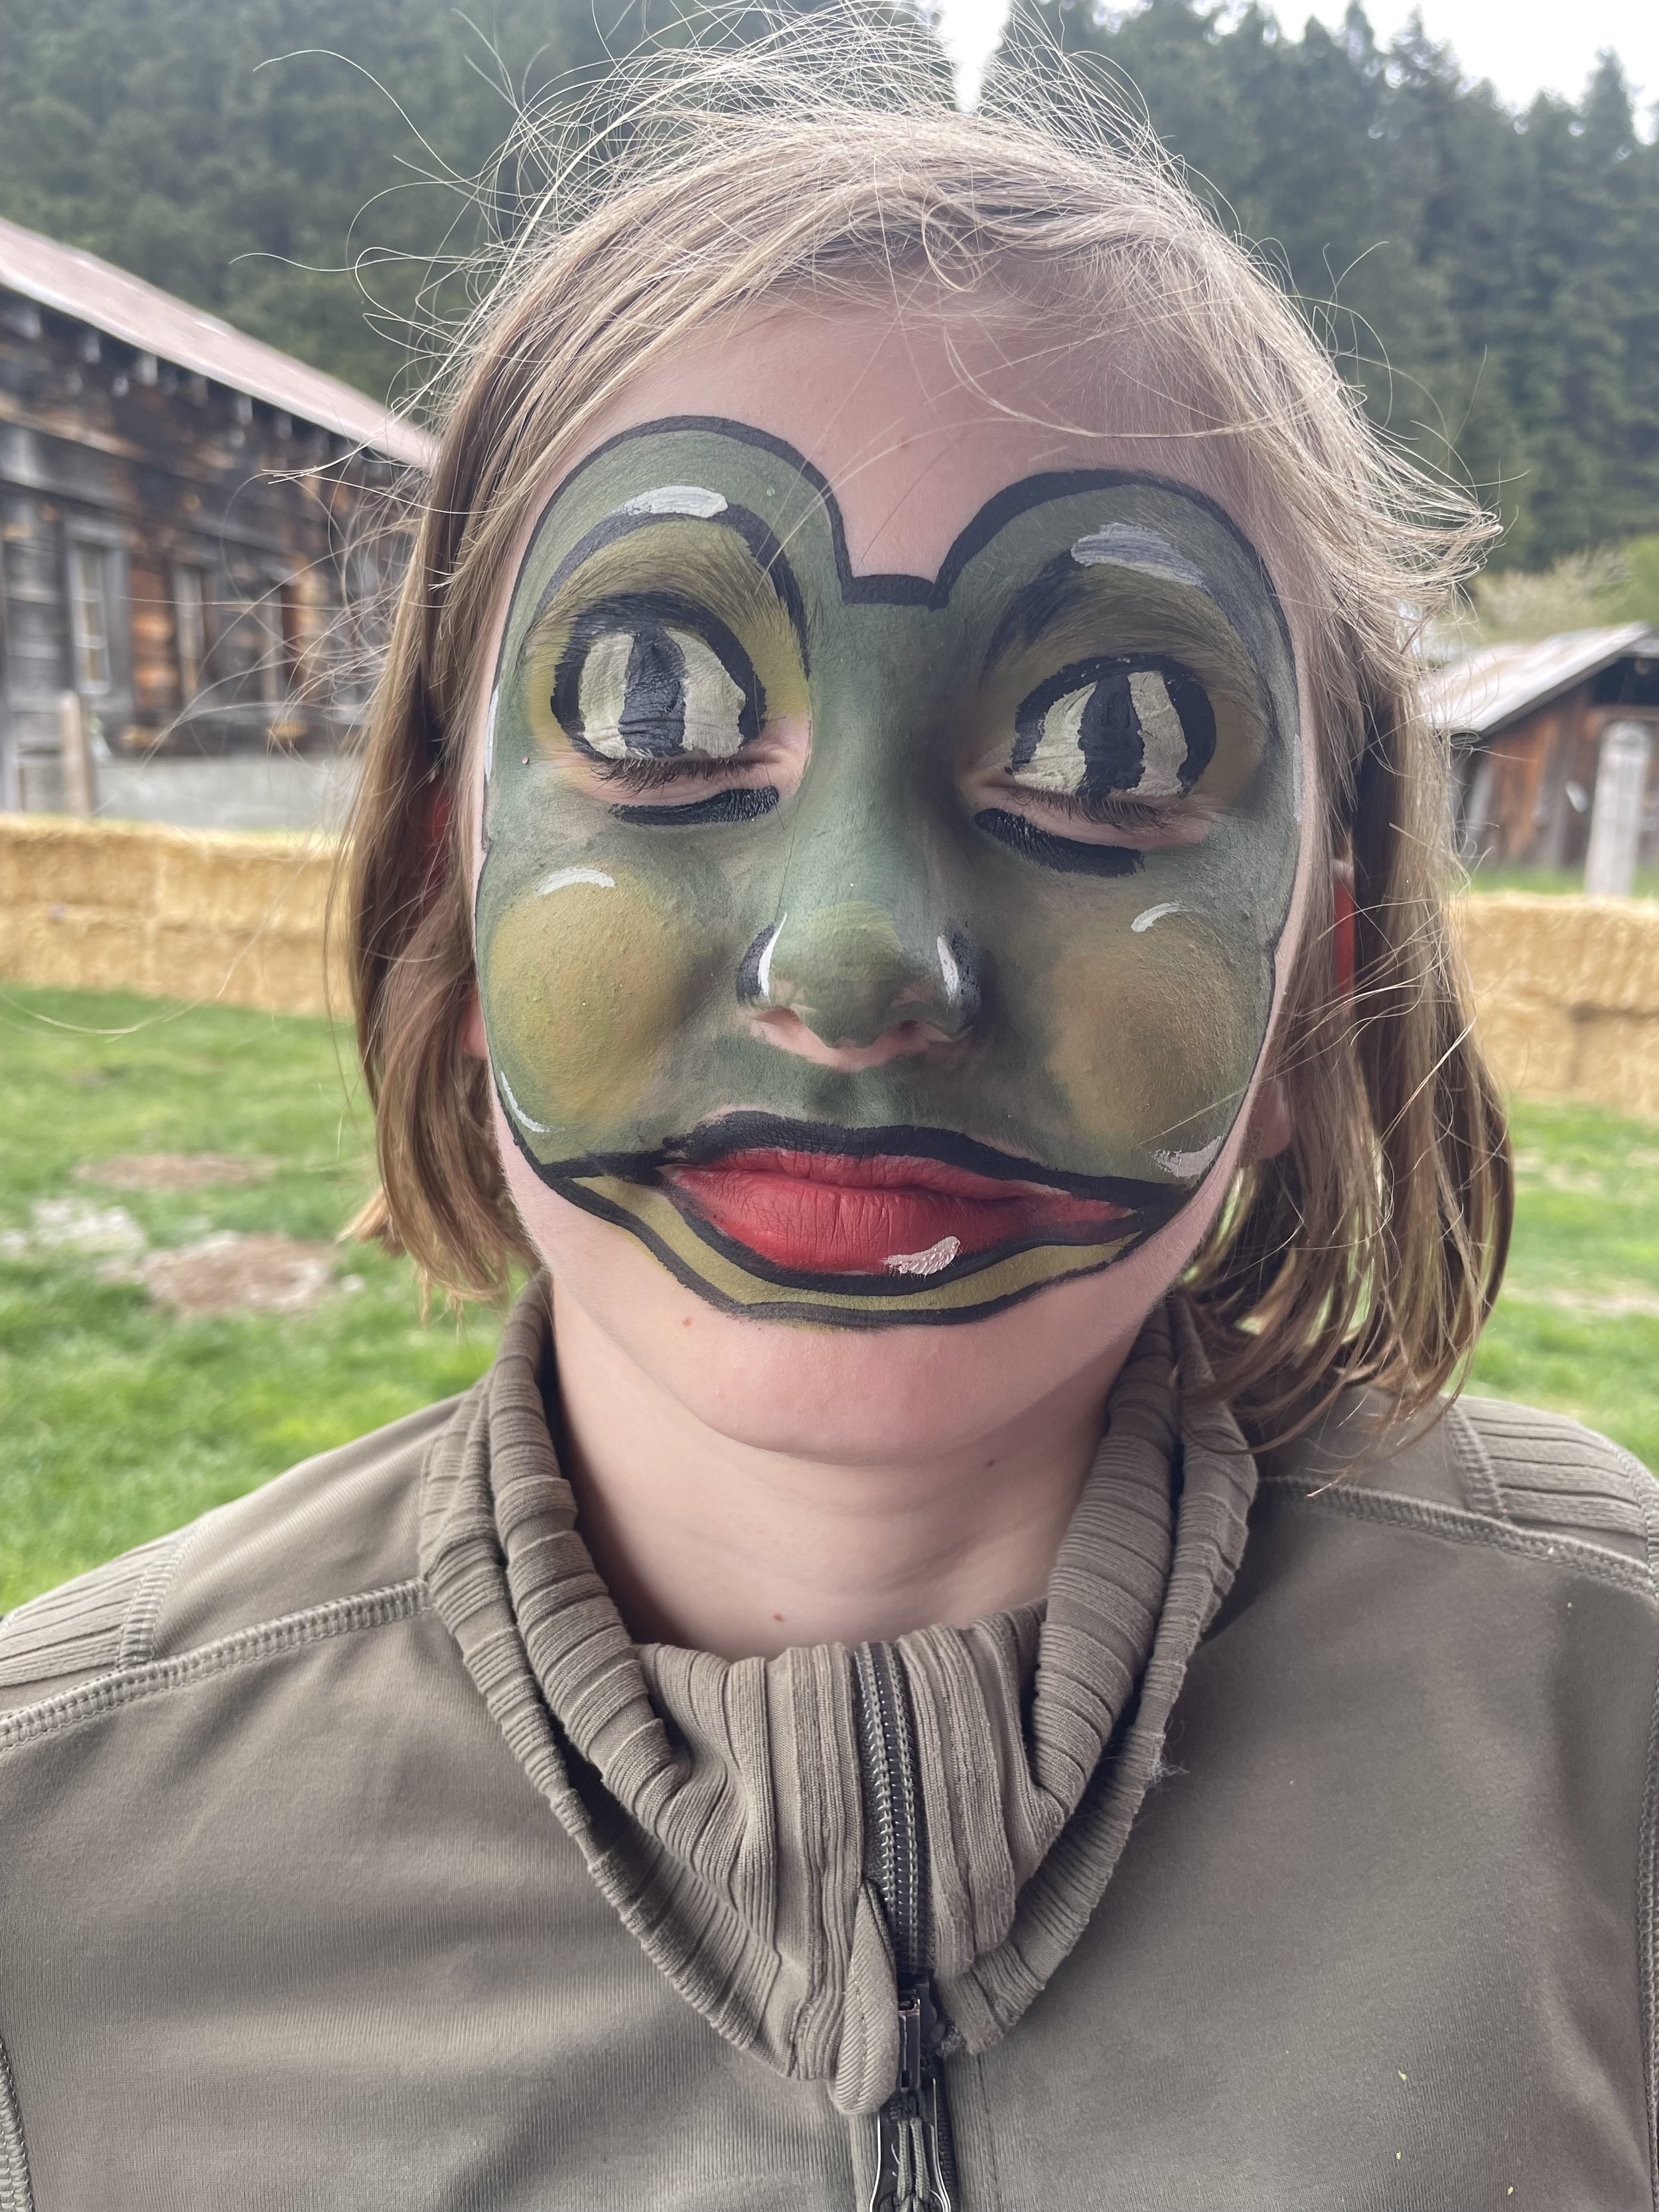 Frog Face Painting